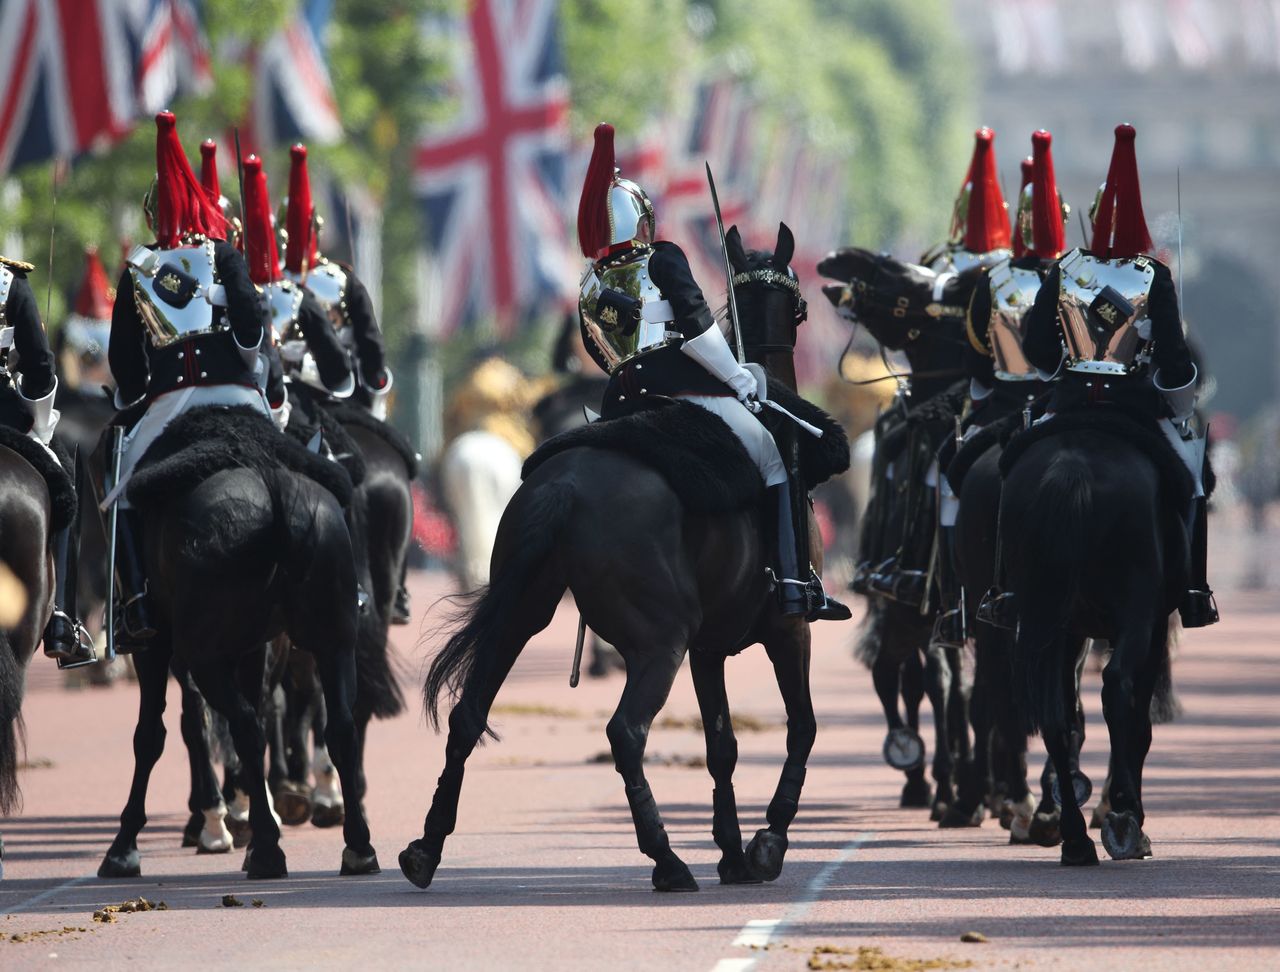 Members of the Household Cavalry on The Mall on their way to Horse Guards Parade.